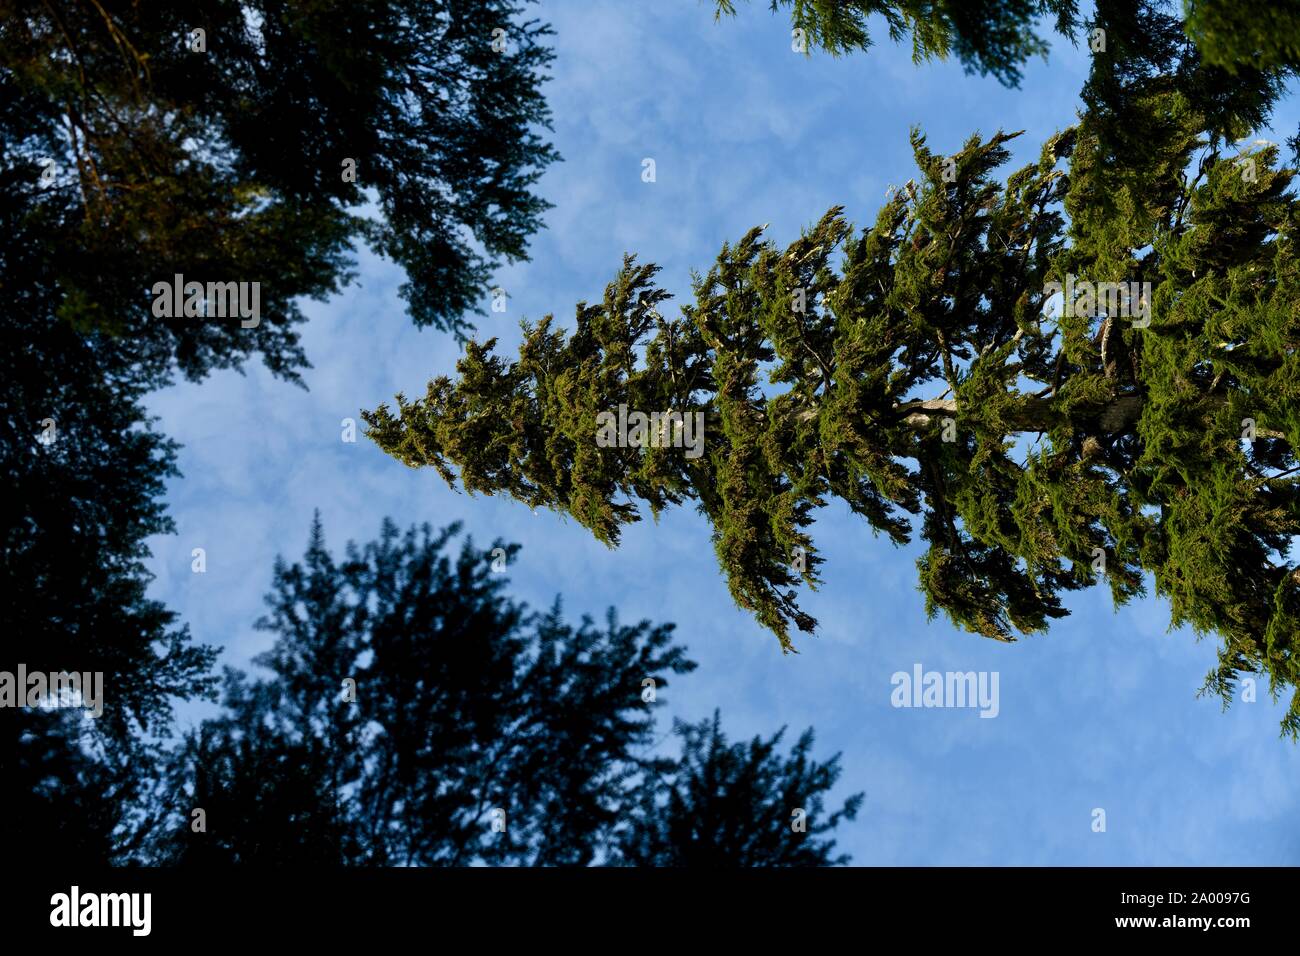 mighty mountain hemlock in the rainforest of British Columbia seen from the ground towards the sky, Stock Photo